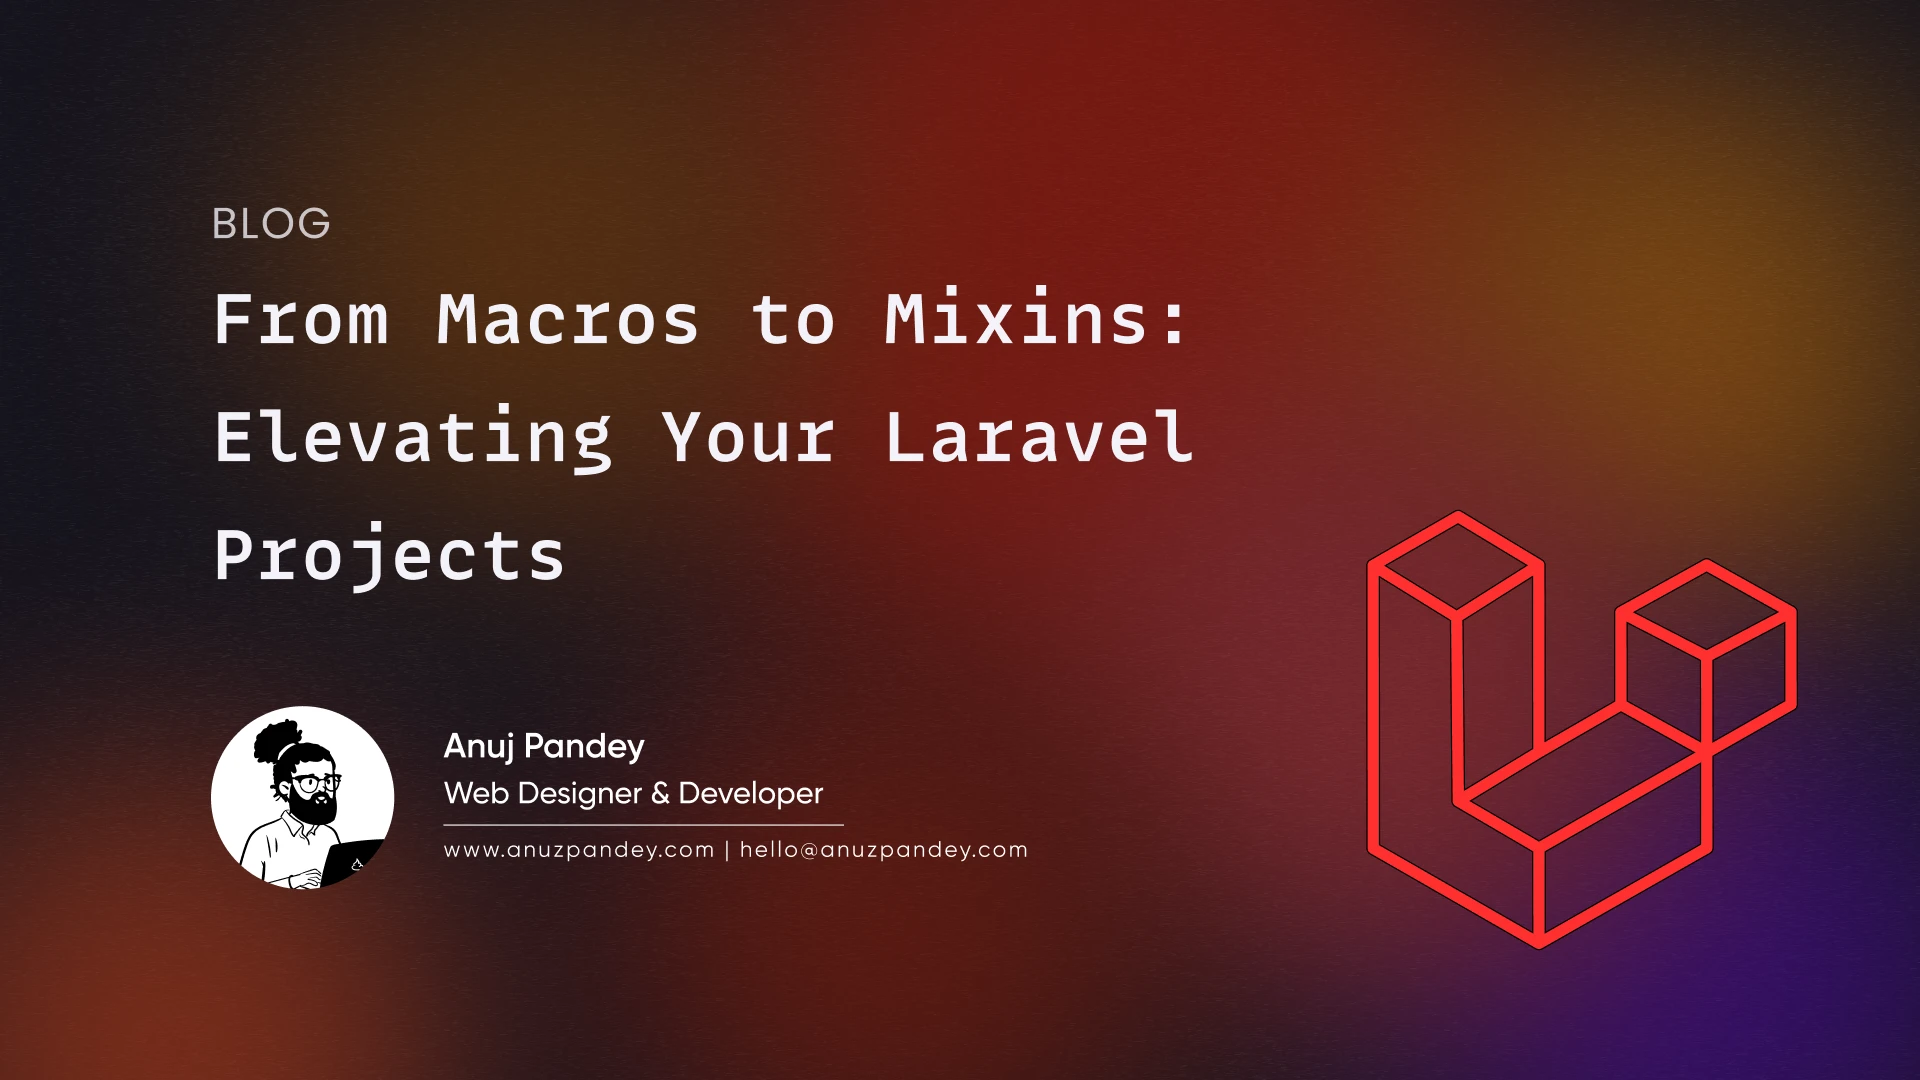 From Macros to Mixins: Elevating Your Laravel Projects